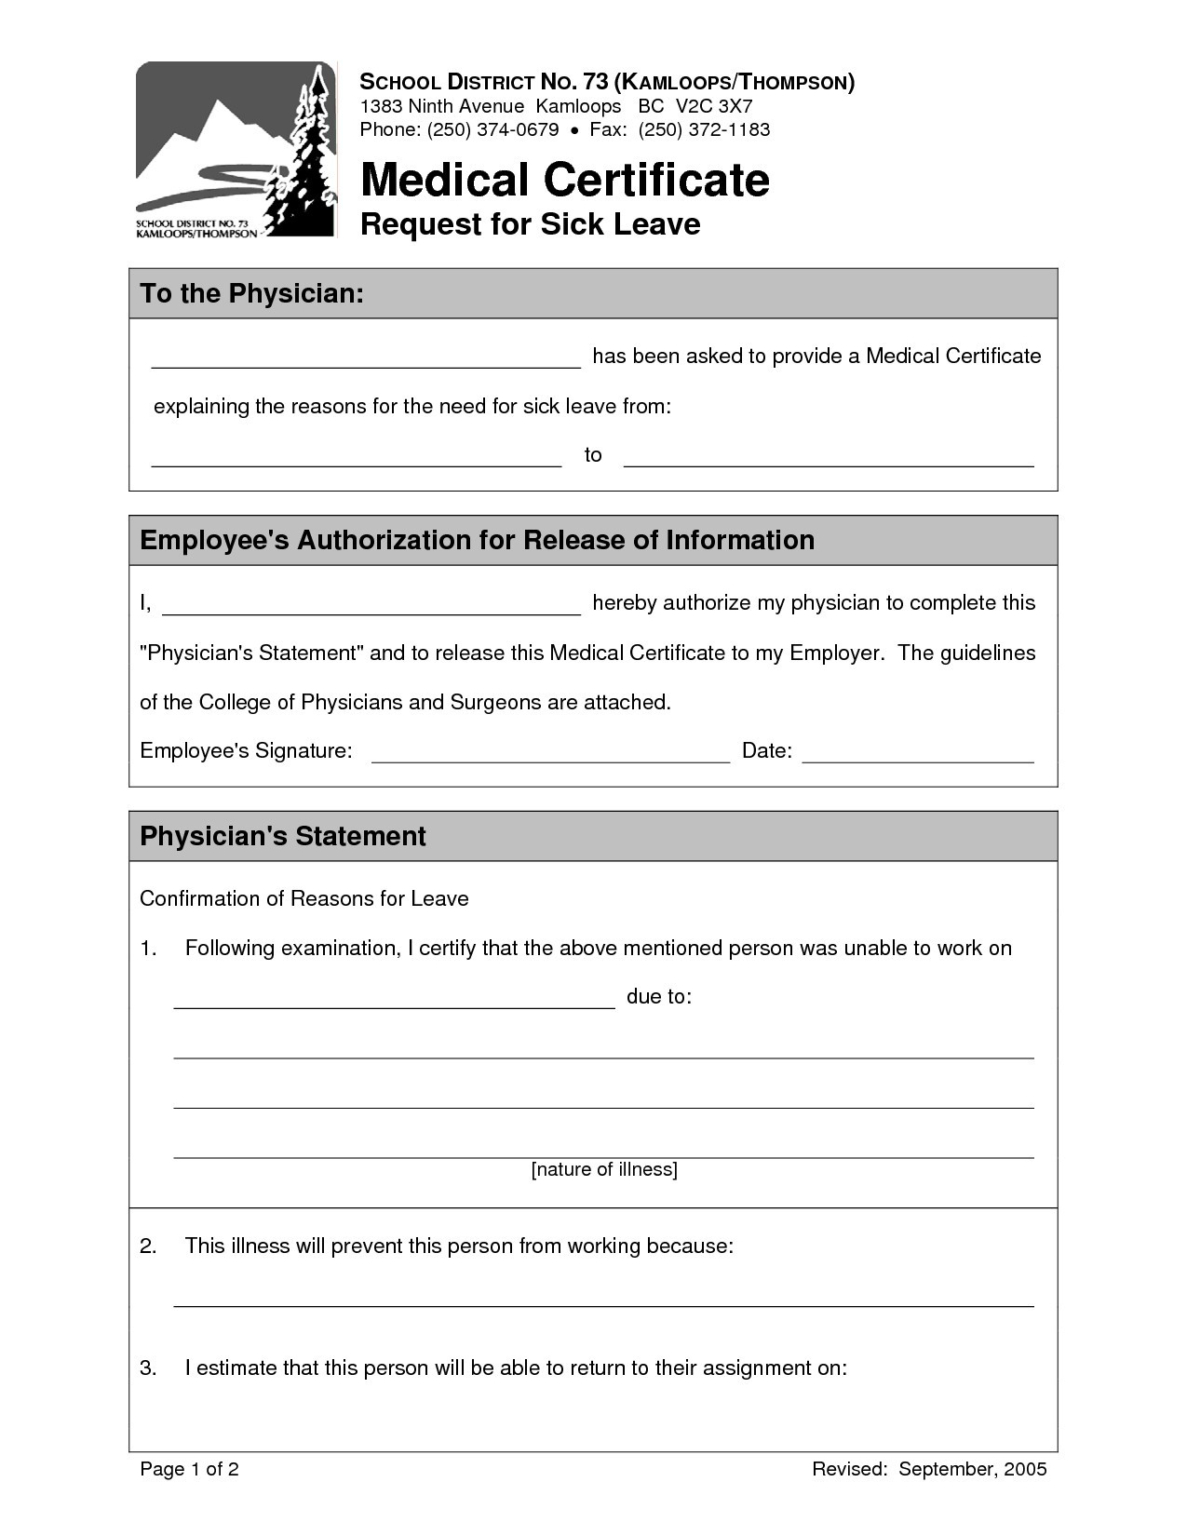 How To Write A Medical Certificate For Sick Leave - Tomope Throughout for Australian Doctors Certificate Template